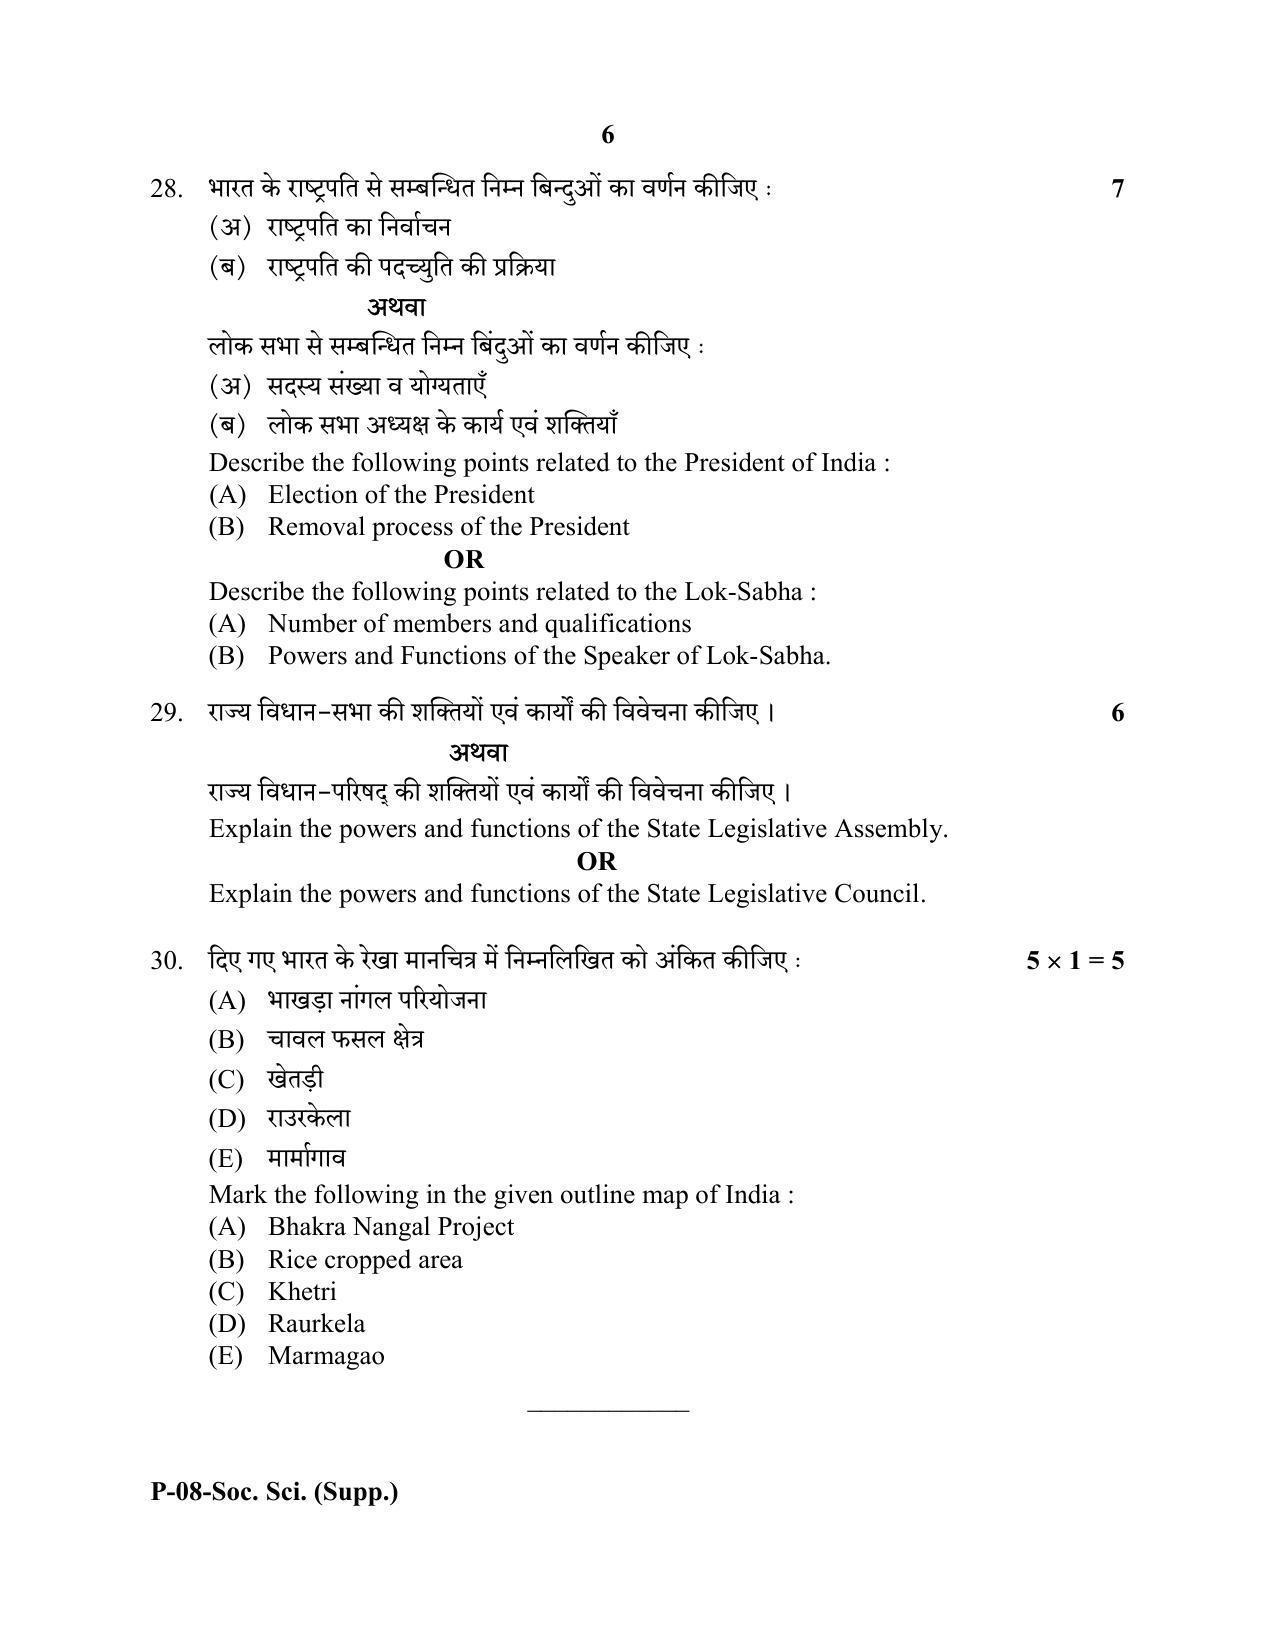 RBSE 2020 Social Science  (SUPPLEMENTARY) Praveshika Question Paper - Page 6